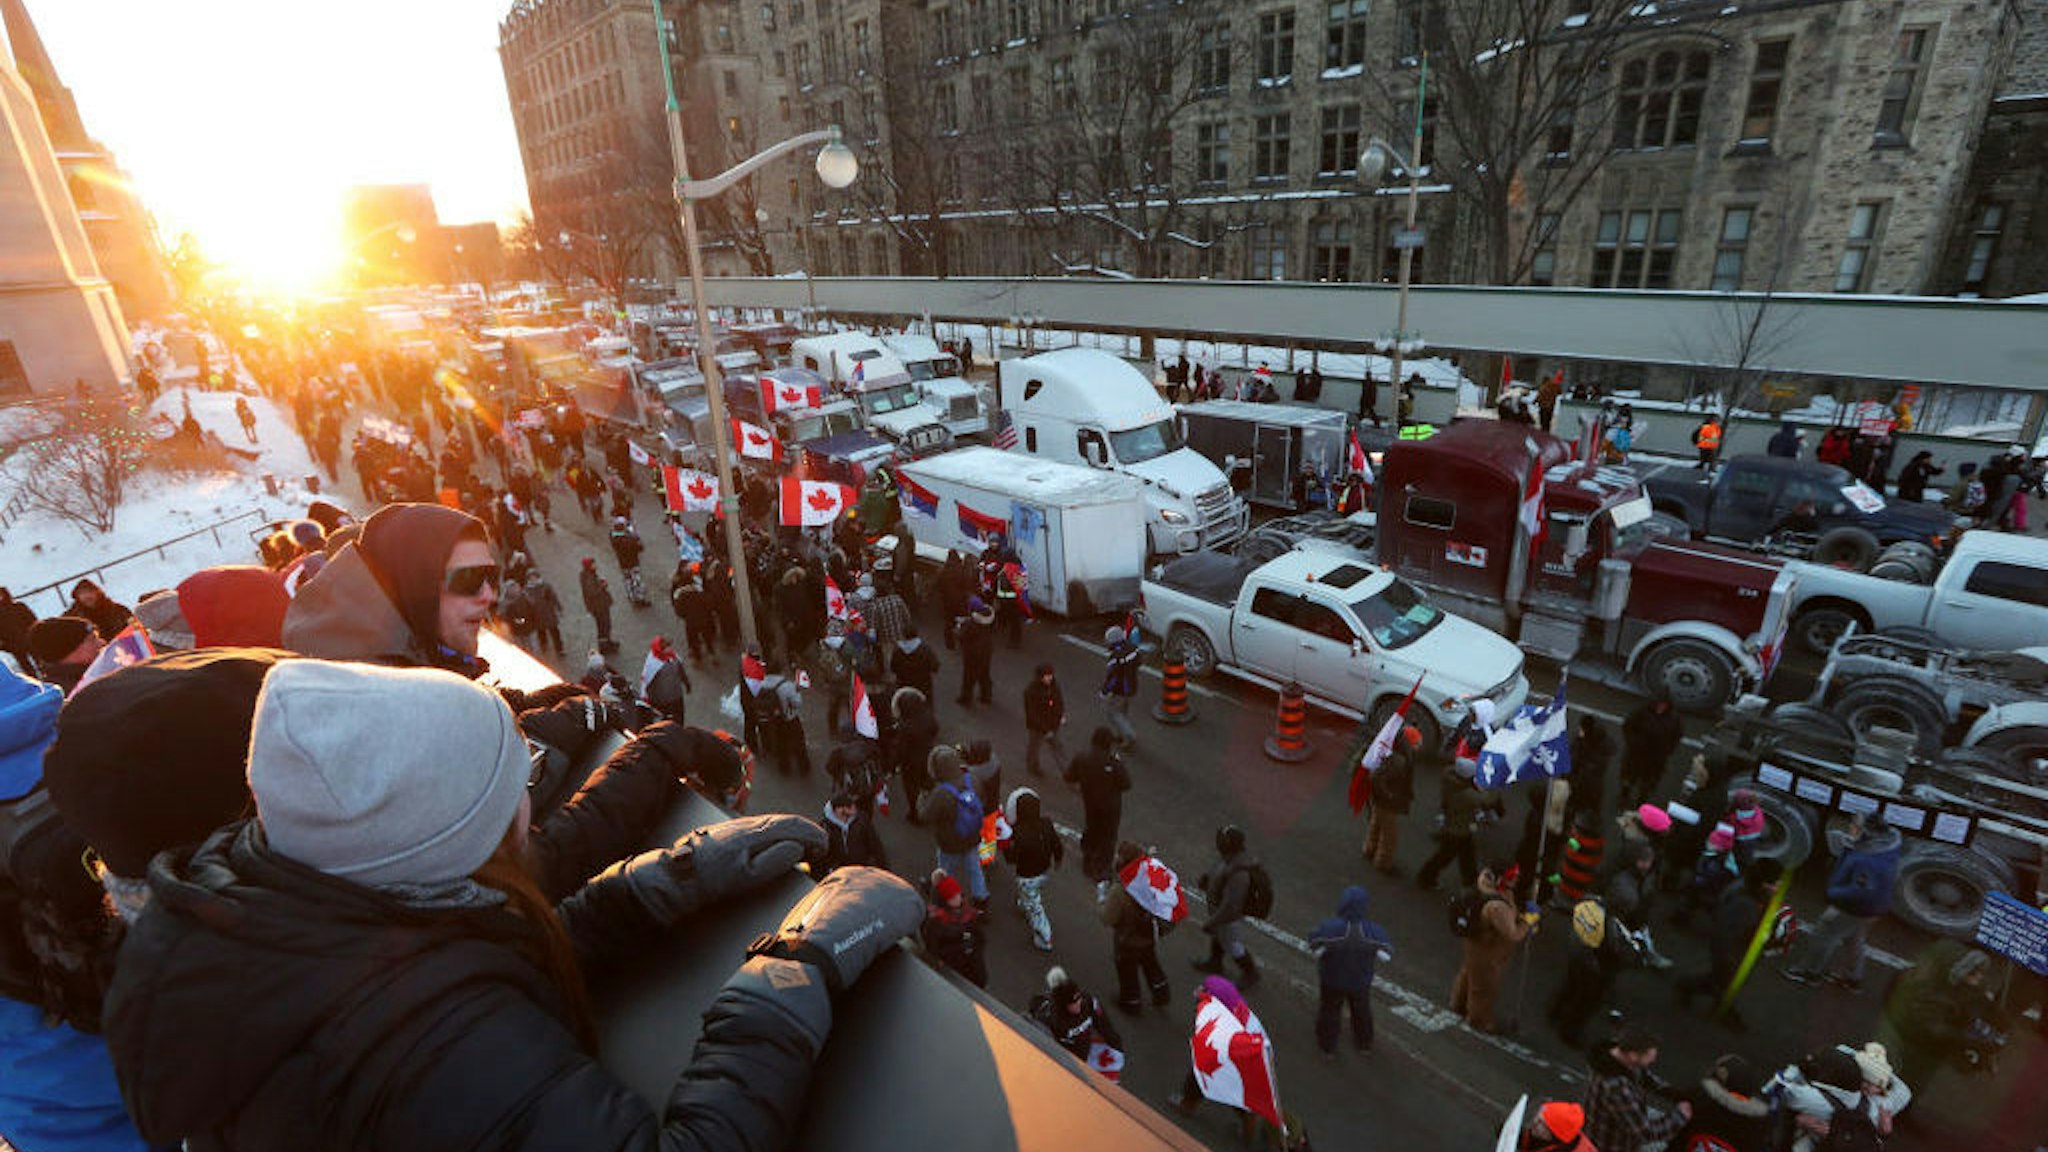 Demonstrators gather as rows of trucks sit parked on Wellington Street during a protest near Parliament Hill in Ottawa, Ontario, Canada, on Saturday, Jan. 29, 2022. A convoy of truckers and others who oppose vaccine mandates began rolling into Ottawa on Friday, putting Canada's capital city on edge amid warnings from police that they don’t know how large the protests will get. Photographer: David Kawai/Bloomberg